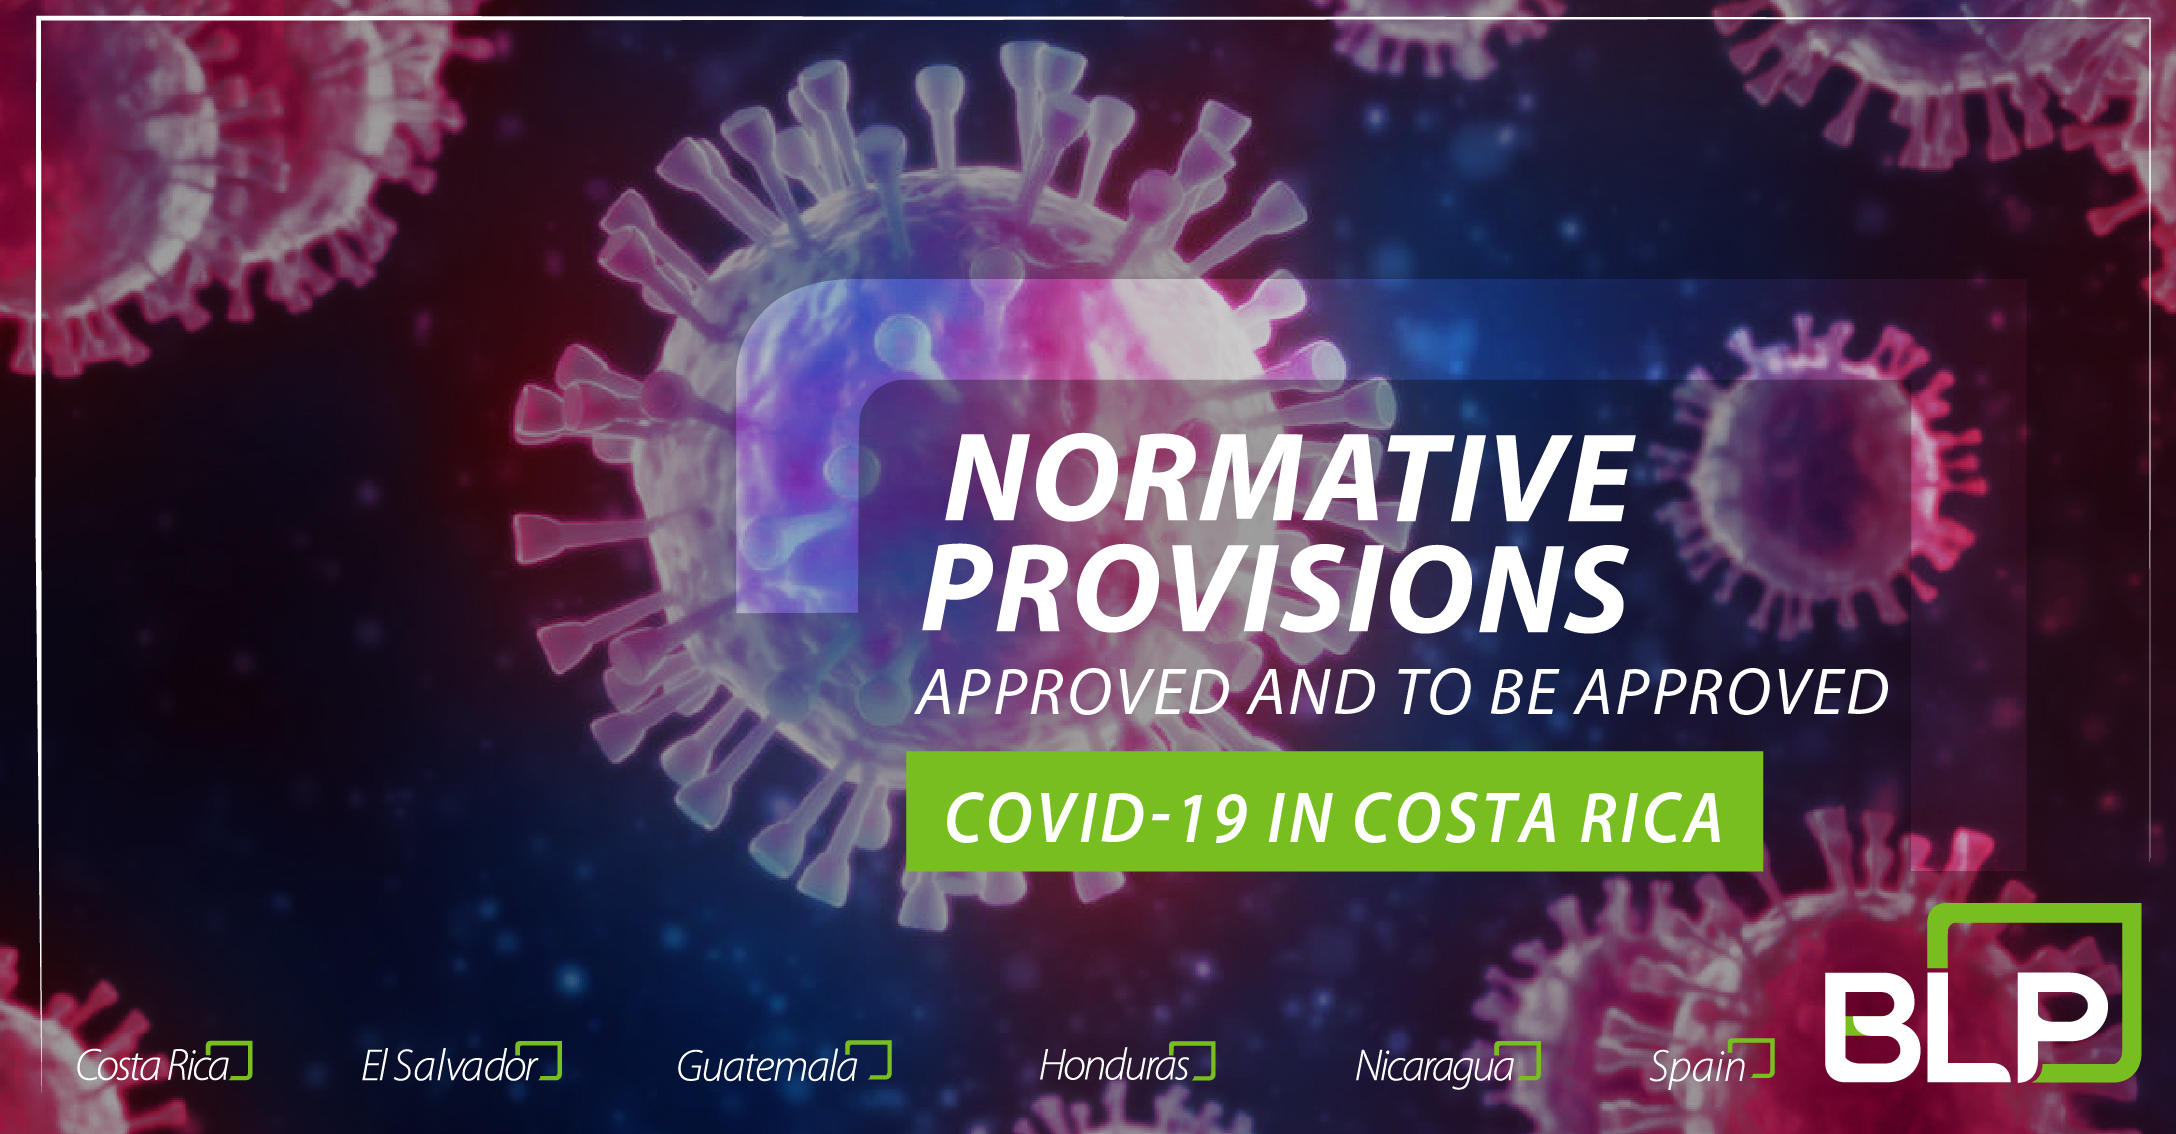 Normative provisions based on COVID-19 in Costa Rica